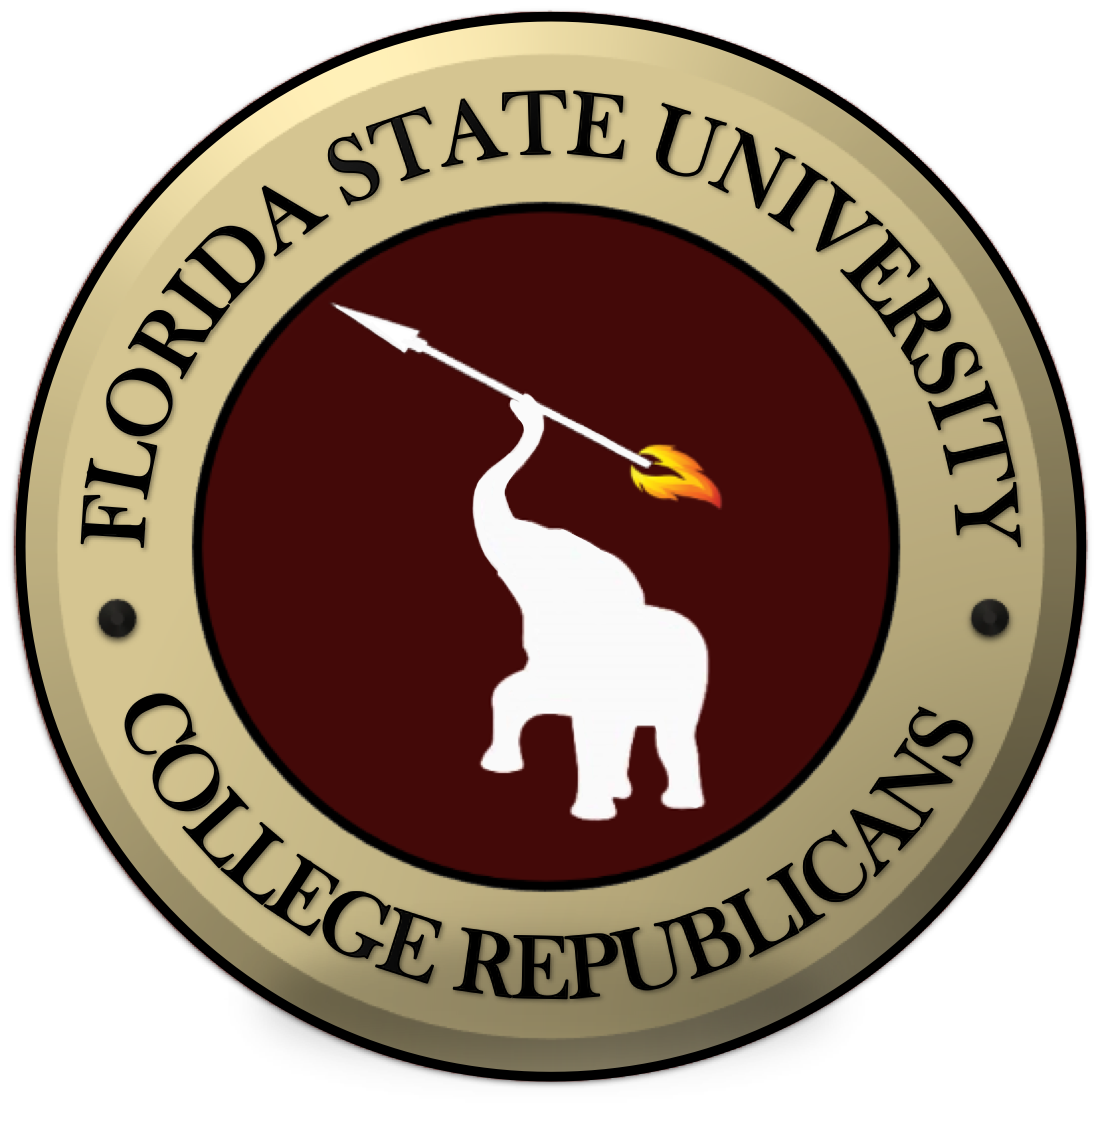 The College Republicans of Florida State University logo